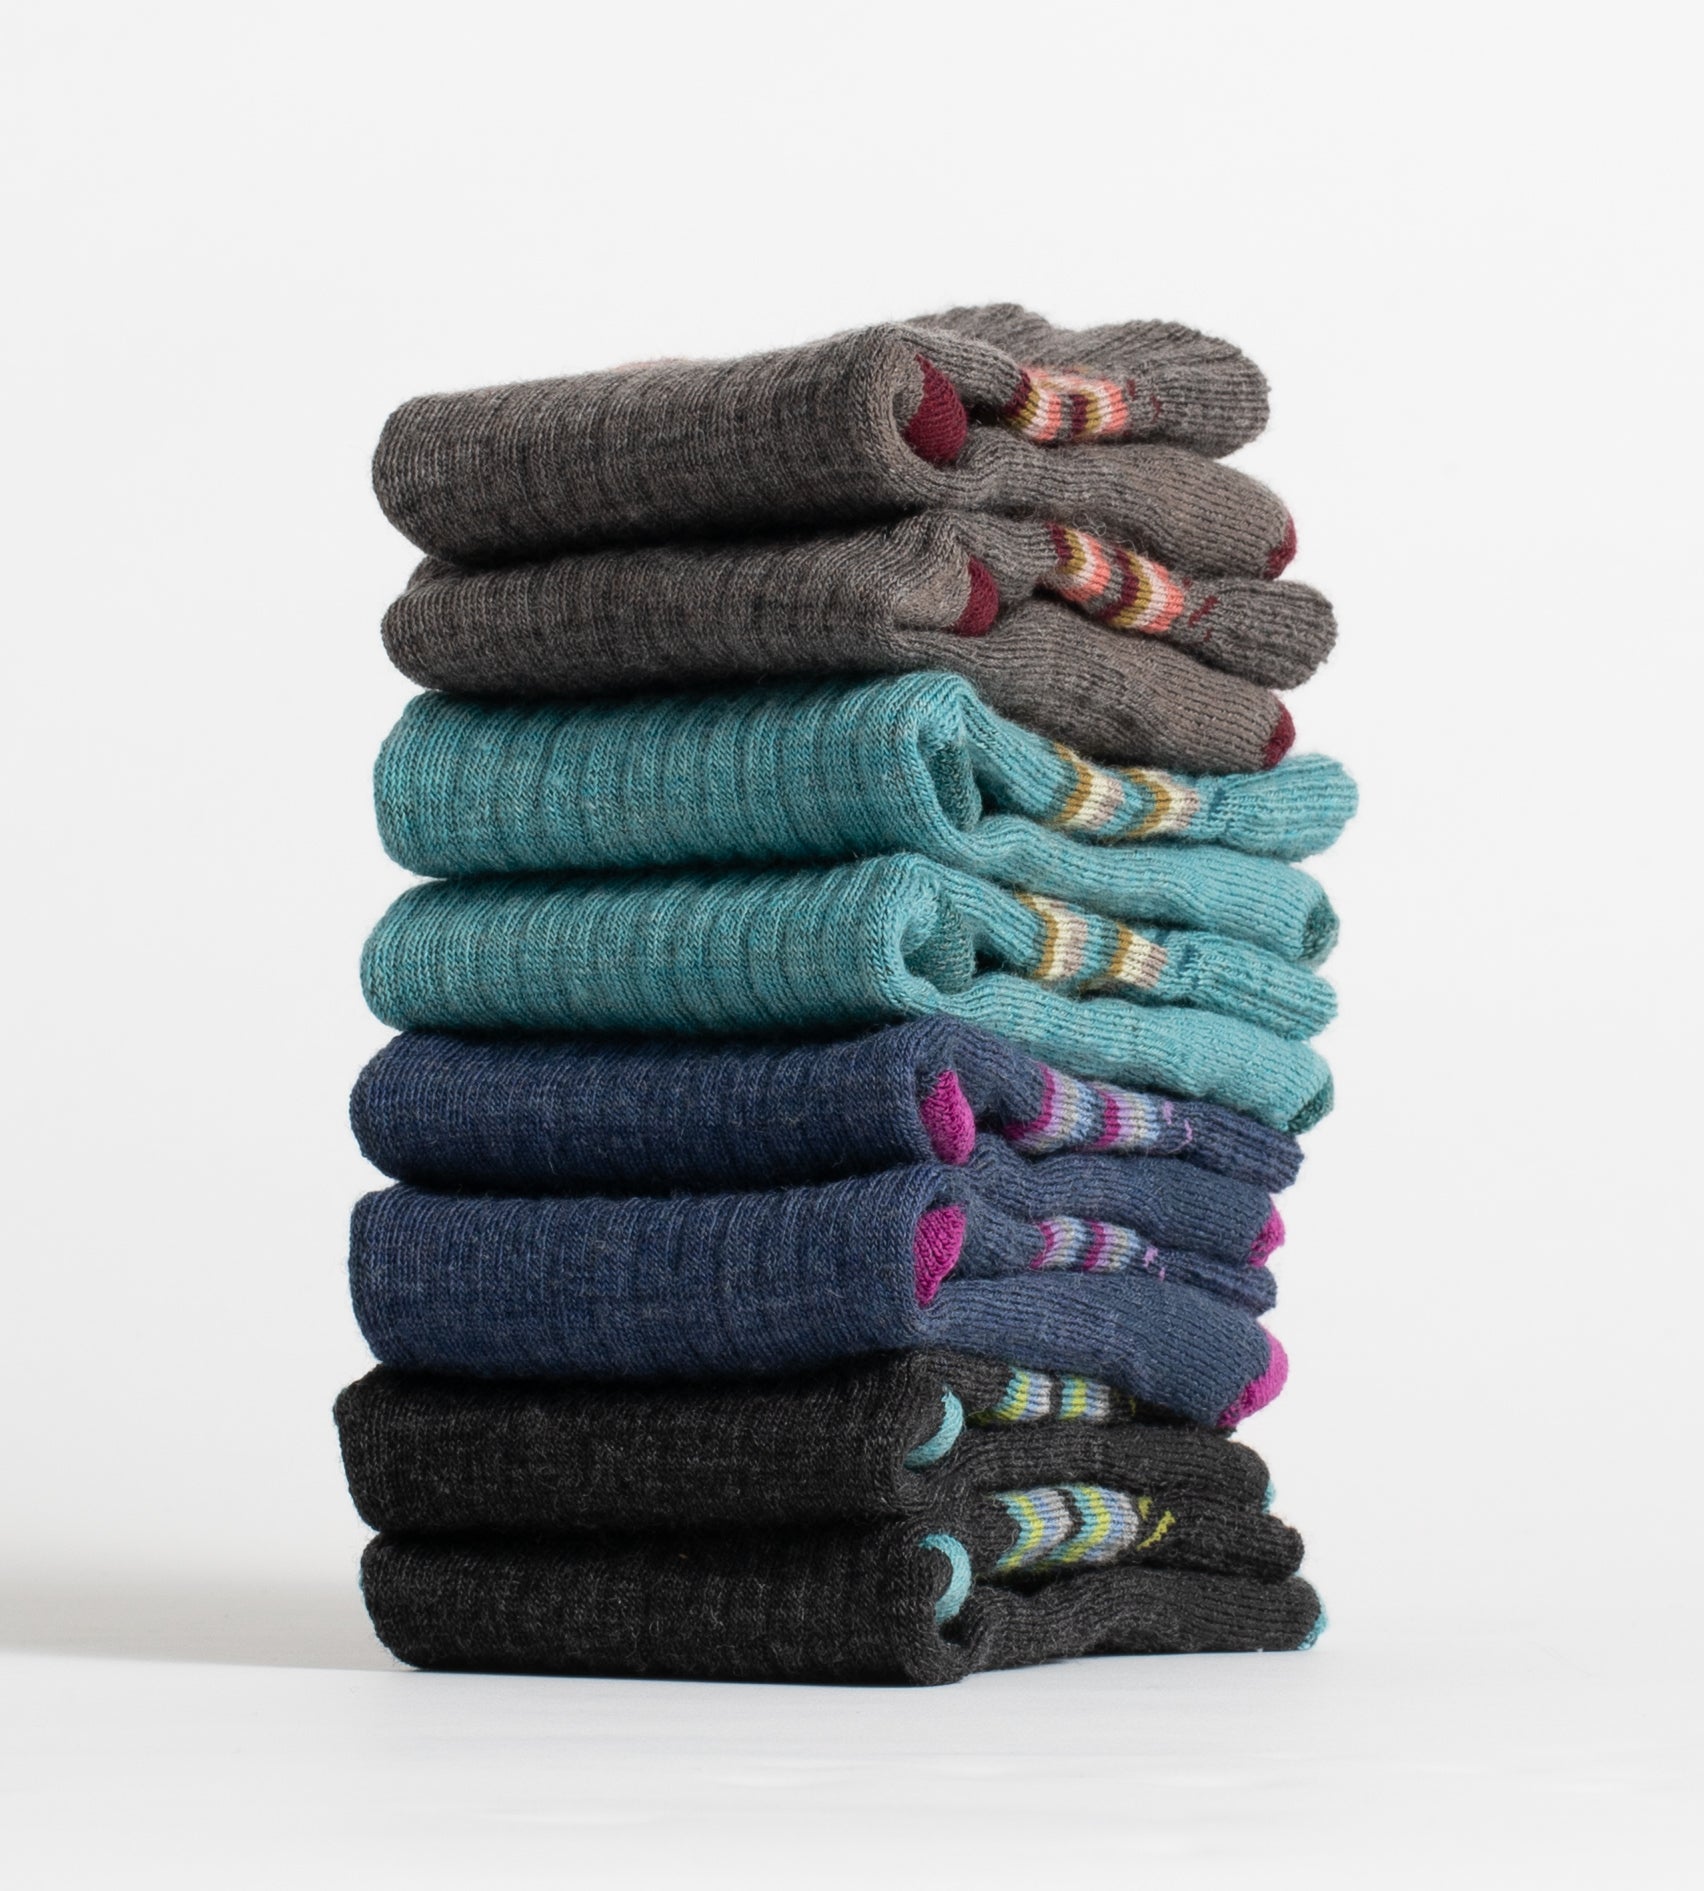 Four different colored sock pairs, folded neatly in a single stack.